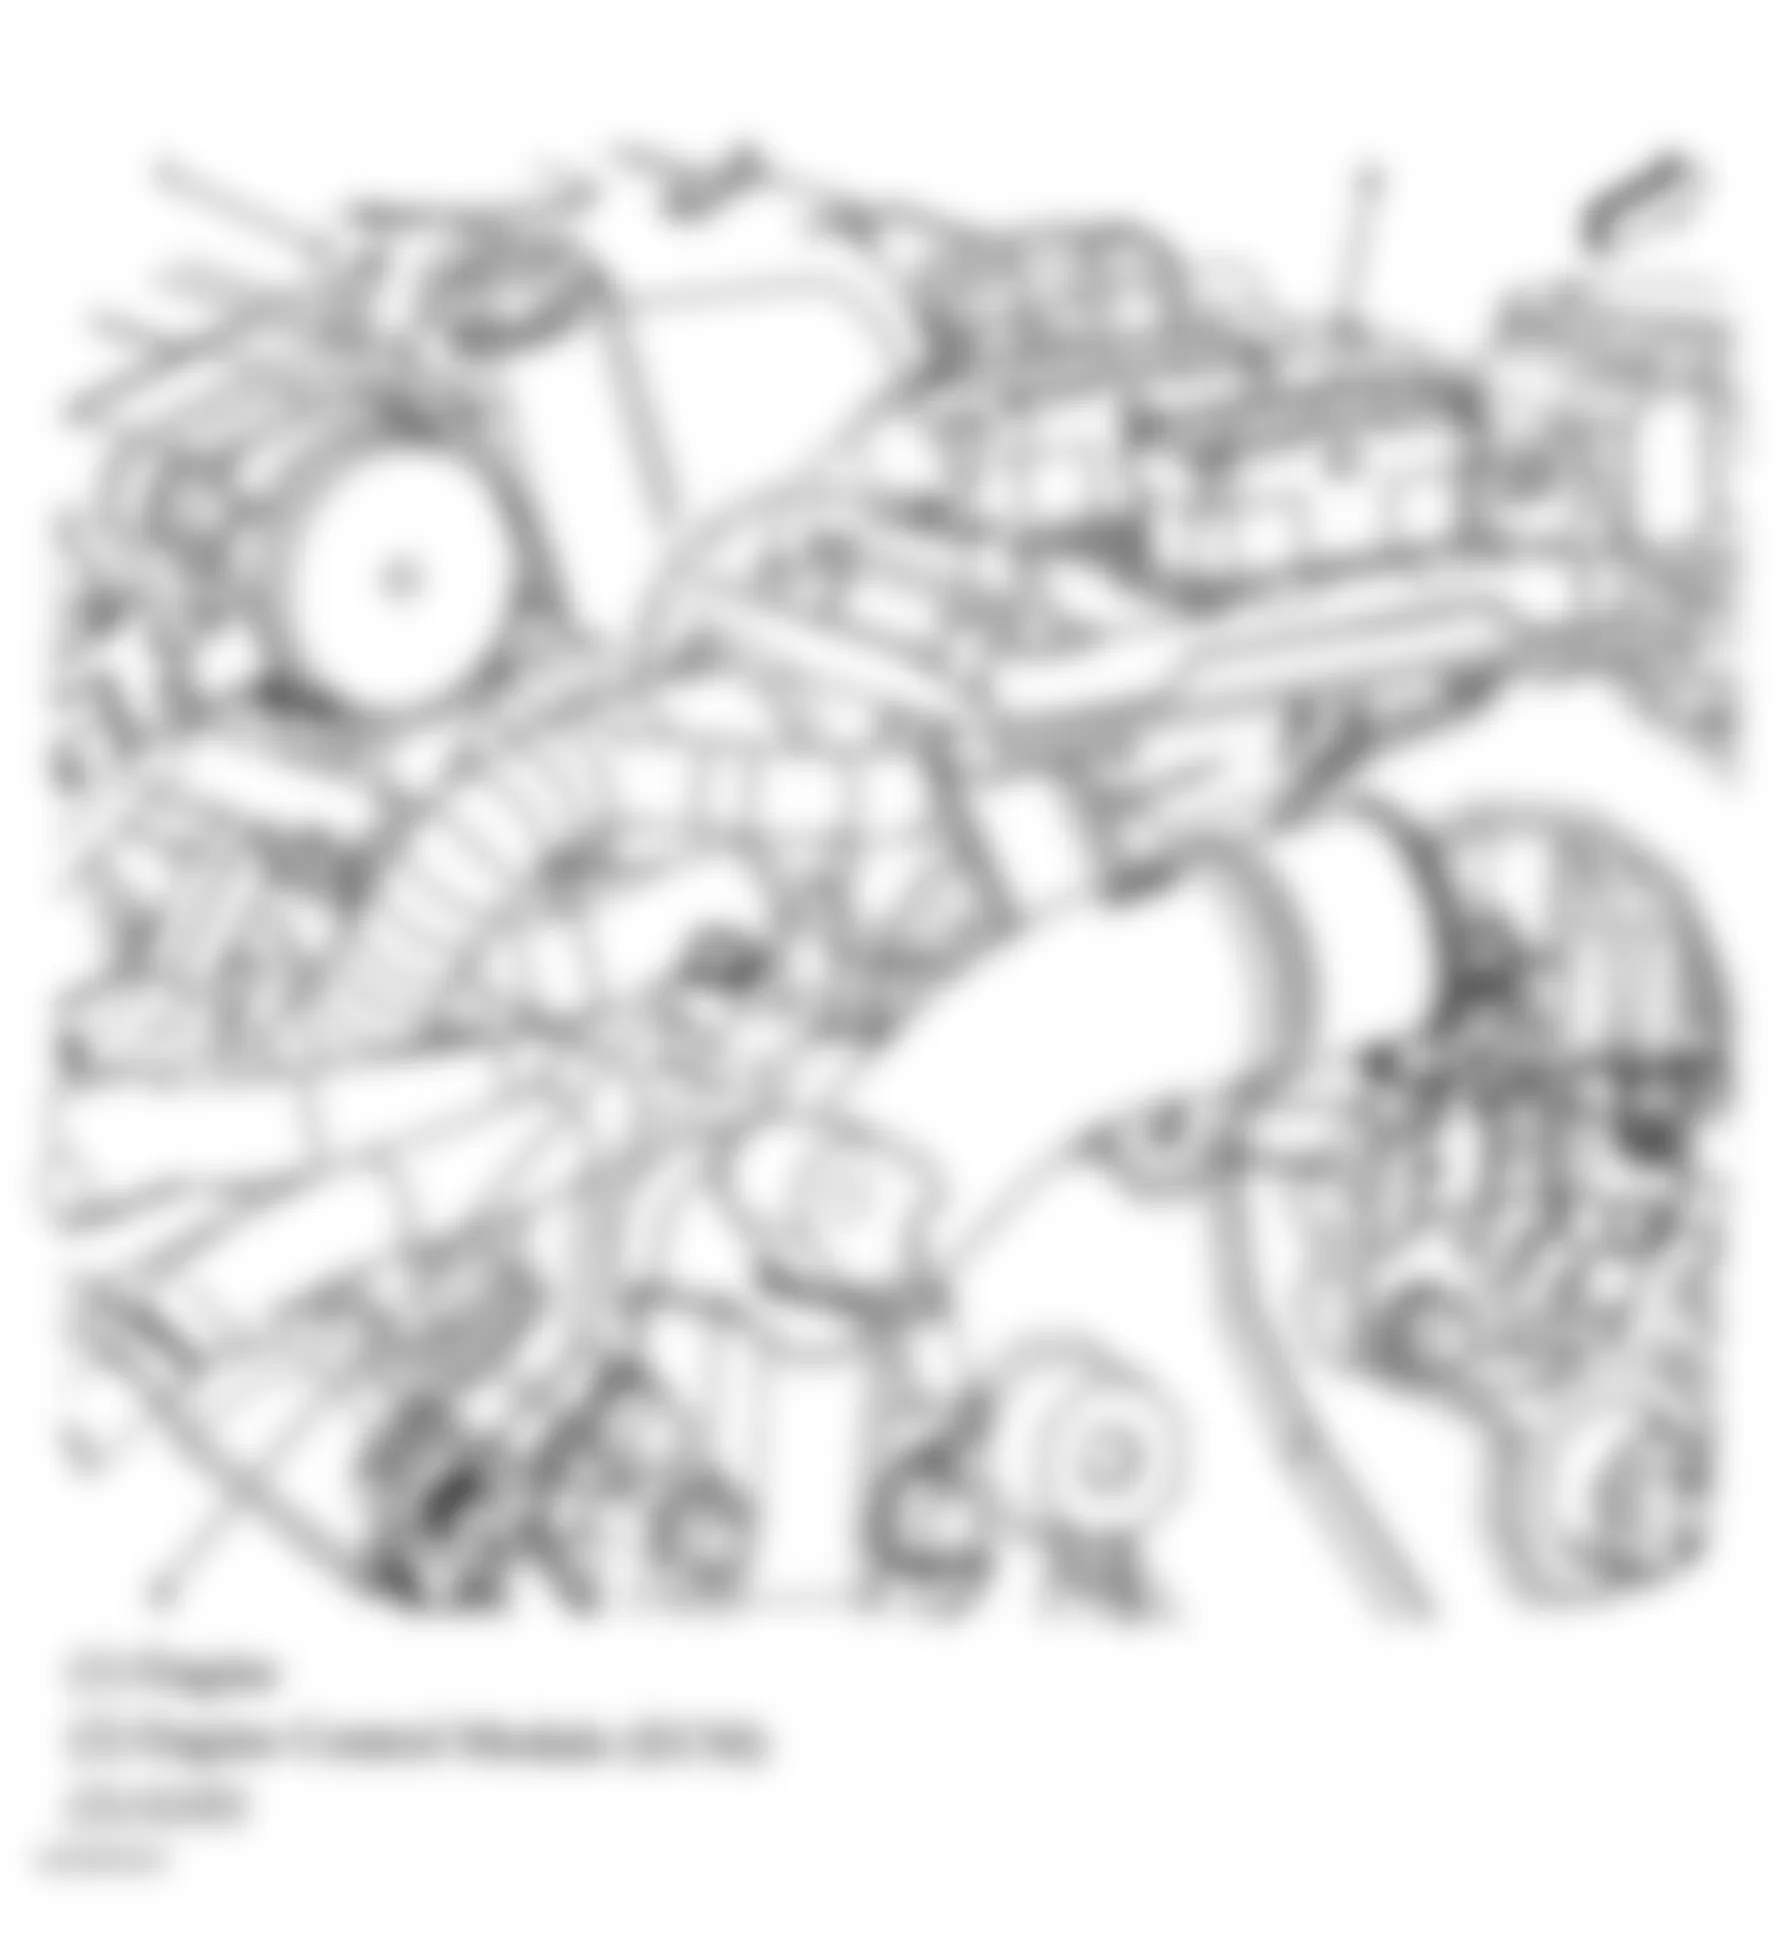 Buick Allure CXS 2008 - Component Locations -  Engine Assembly (3.6L)